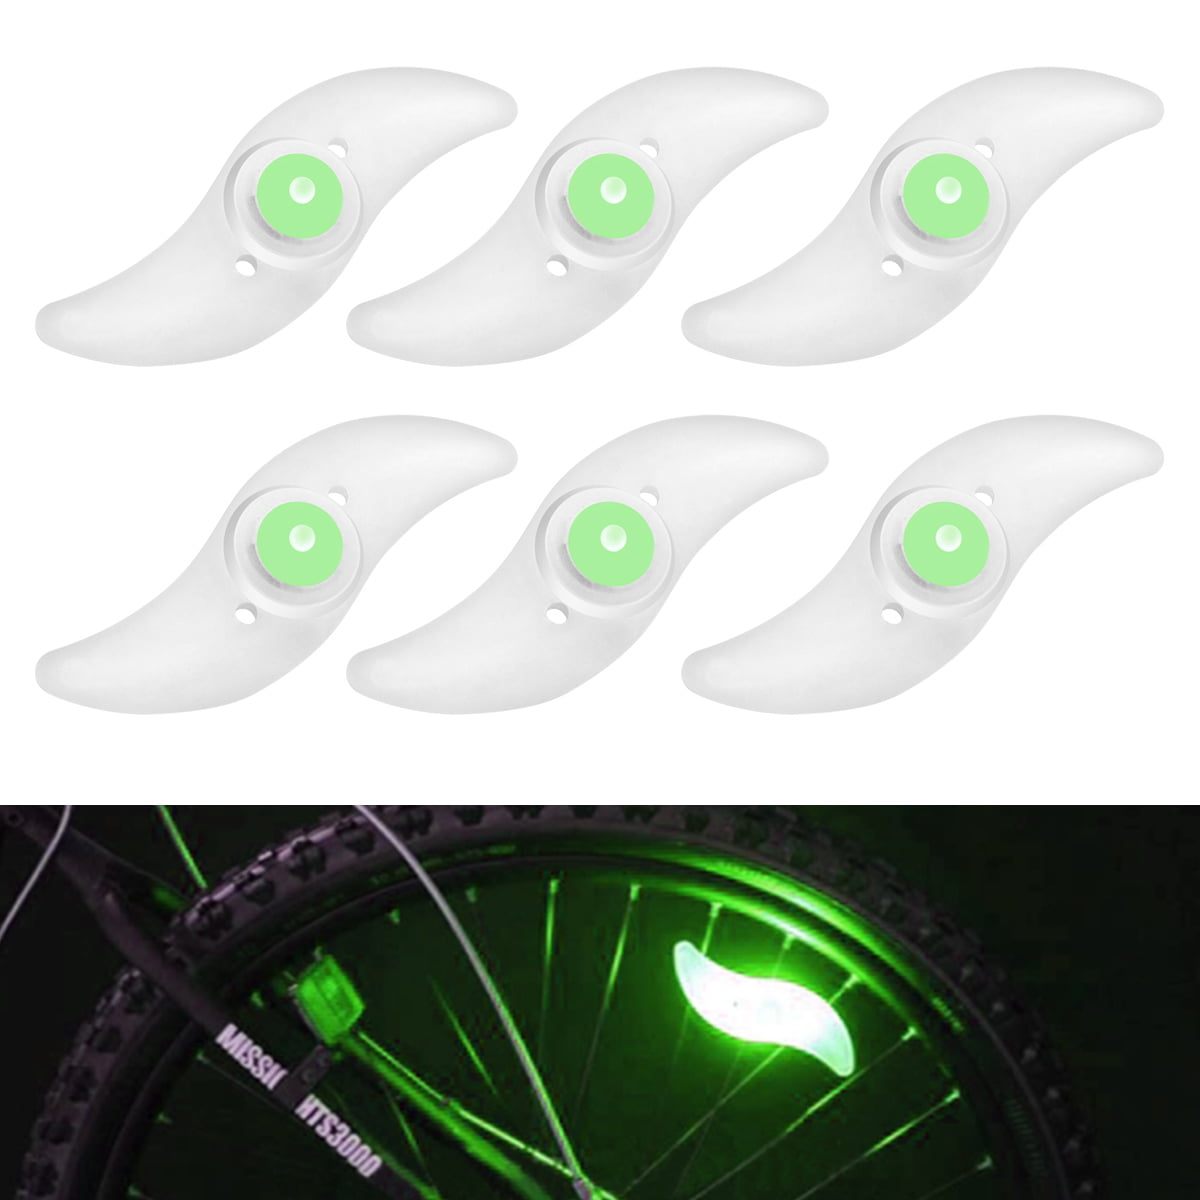 Spoke Decoration Waterproof Bike Wheel Light Cycling Rim Tire Spoke Light with 3 LED Flash Modes Neon Lamps used for Safe and Warning Oumers Bike Spoke Light Blue Red Green Colorful 